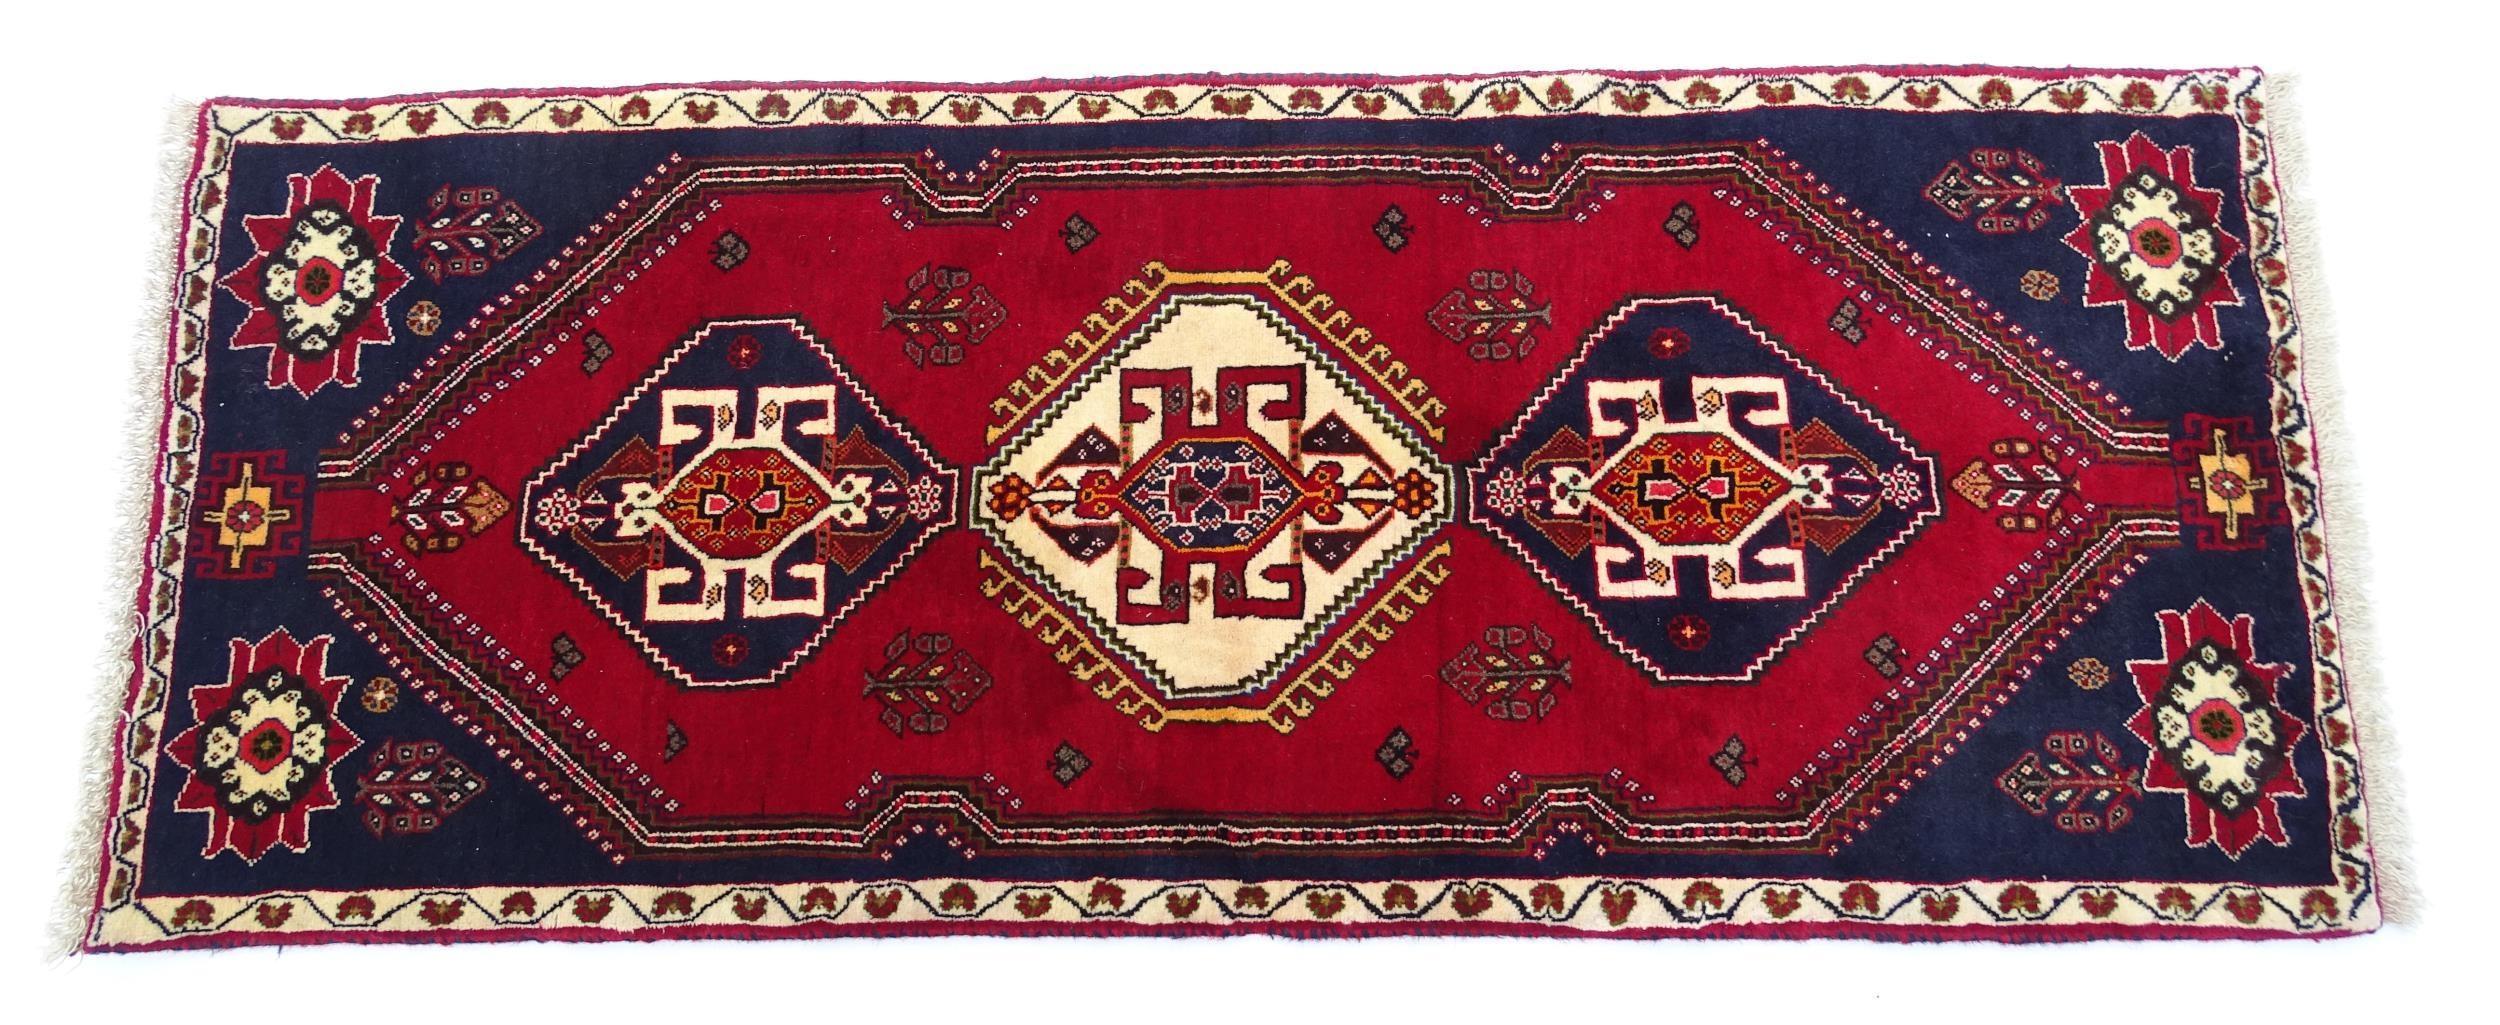 Carpet / Rug: A South West Persian qashgai runner, the red and blue ground with central geometric